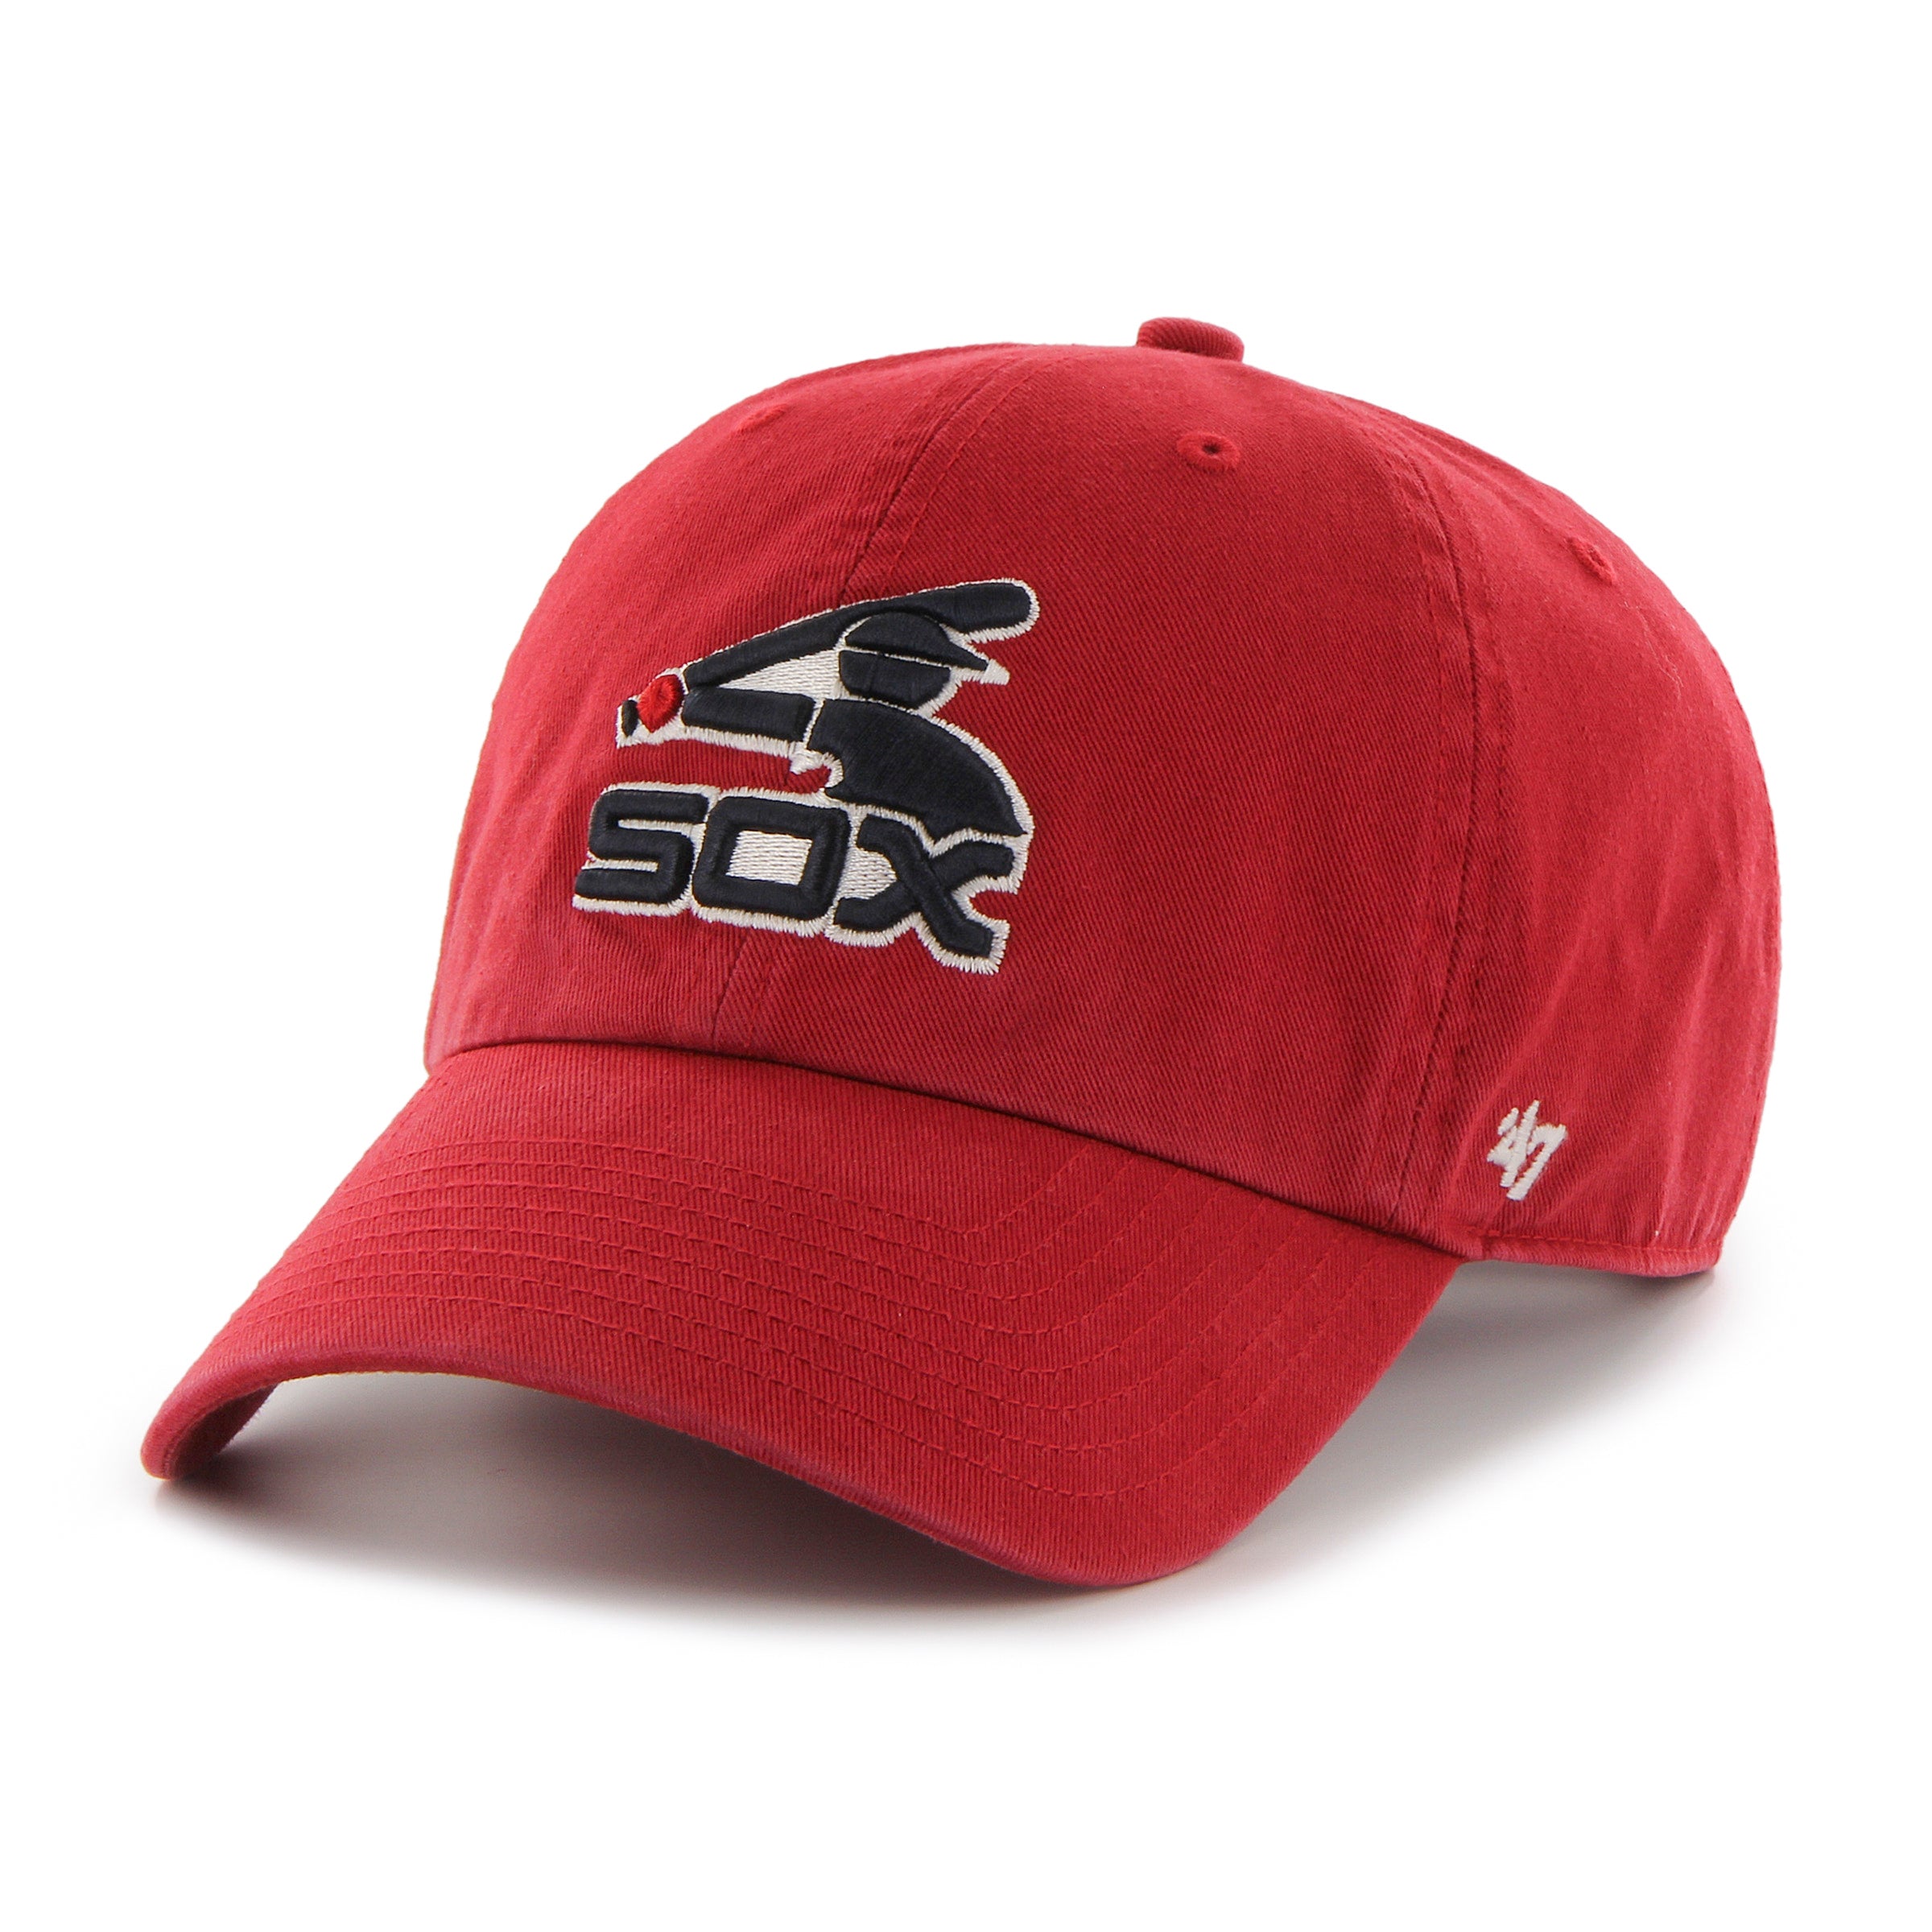  '47 Boston Red Sox 1976 Throwback Blue Clean Up Cap